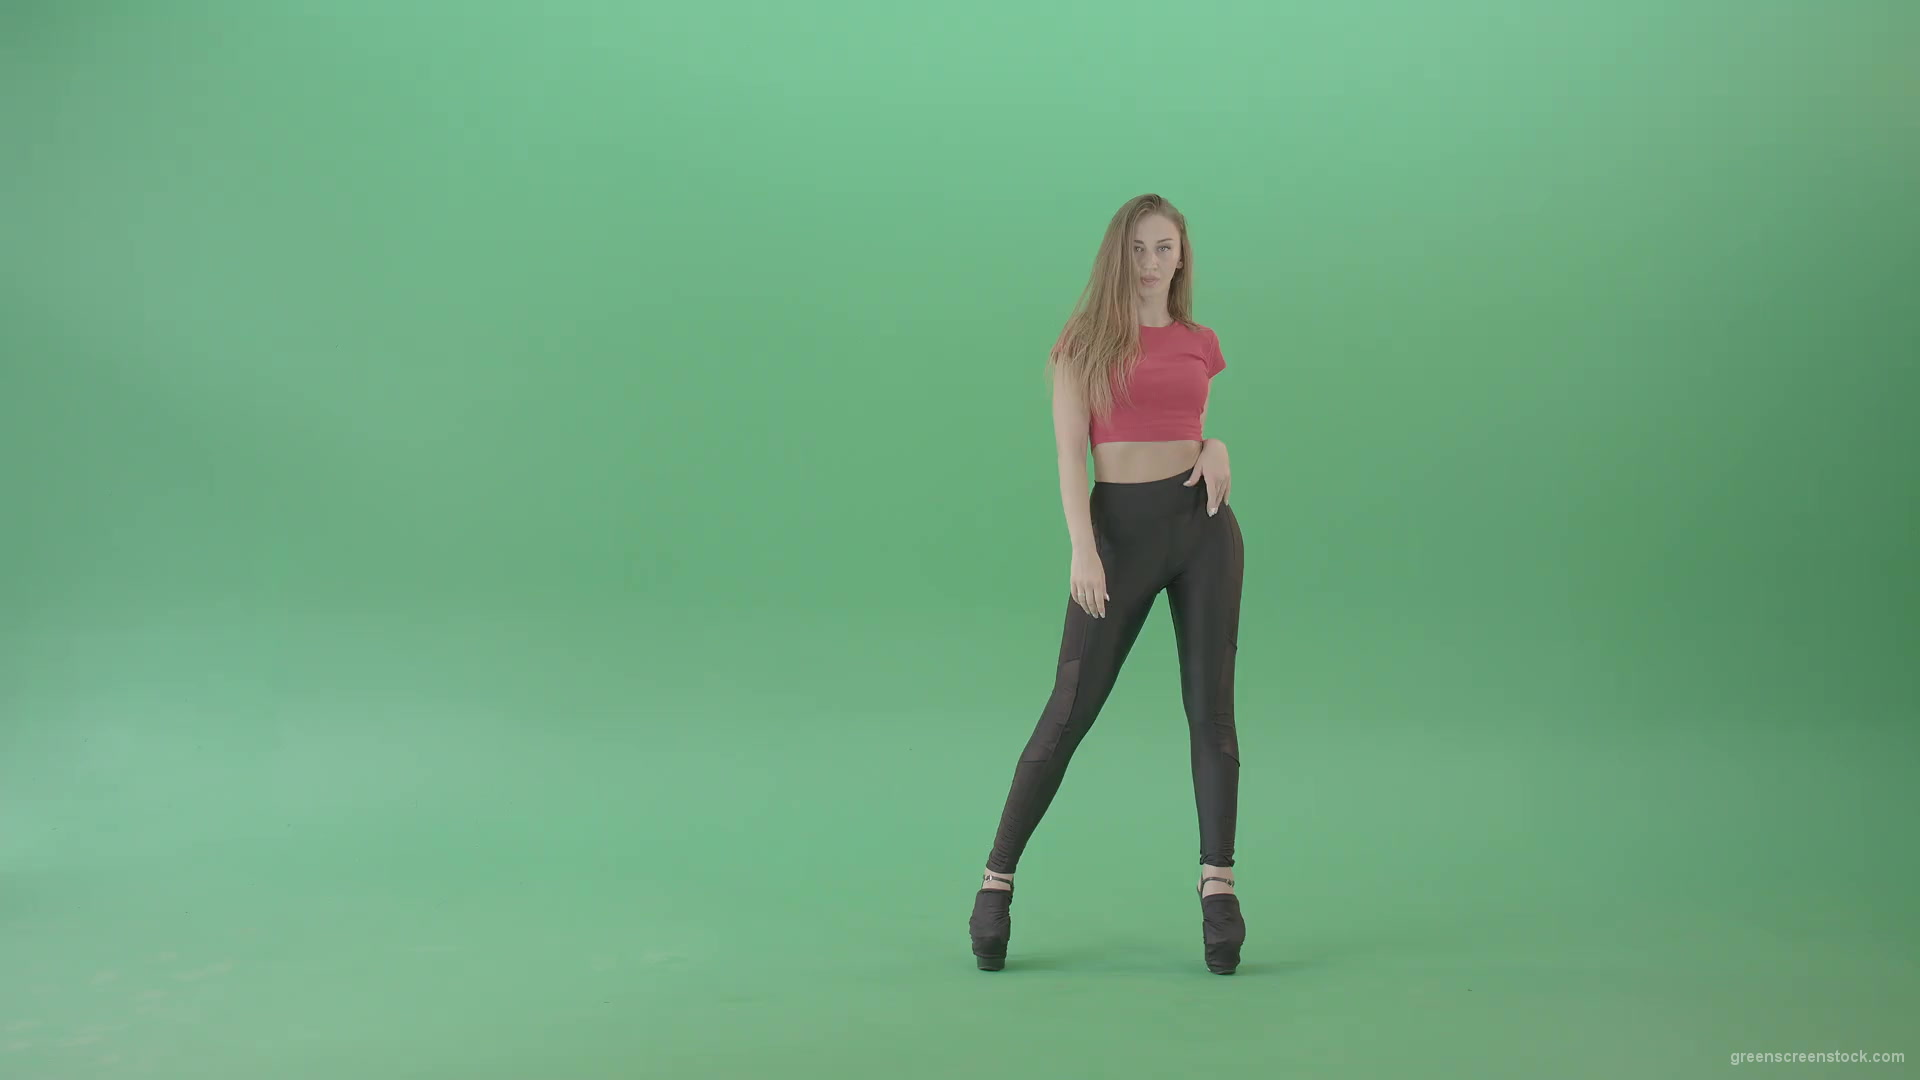 Sexy-Girl-posing-on-green-screen-in-red-t-shirt-4K-Video-Footage-1920_001 Green Screen Stock